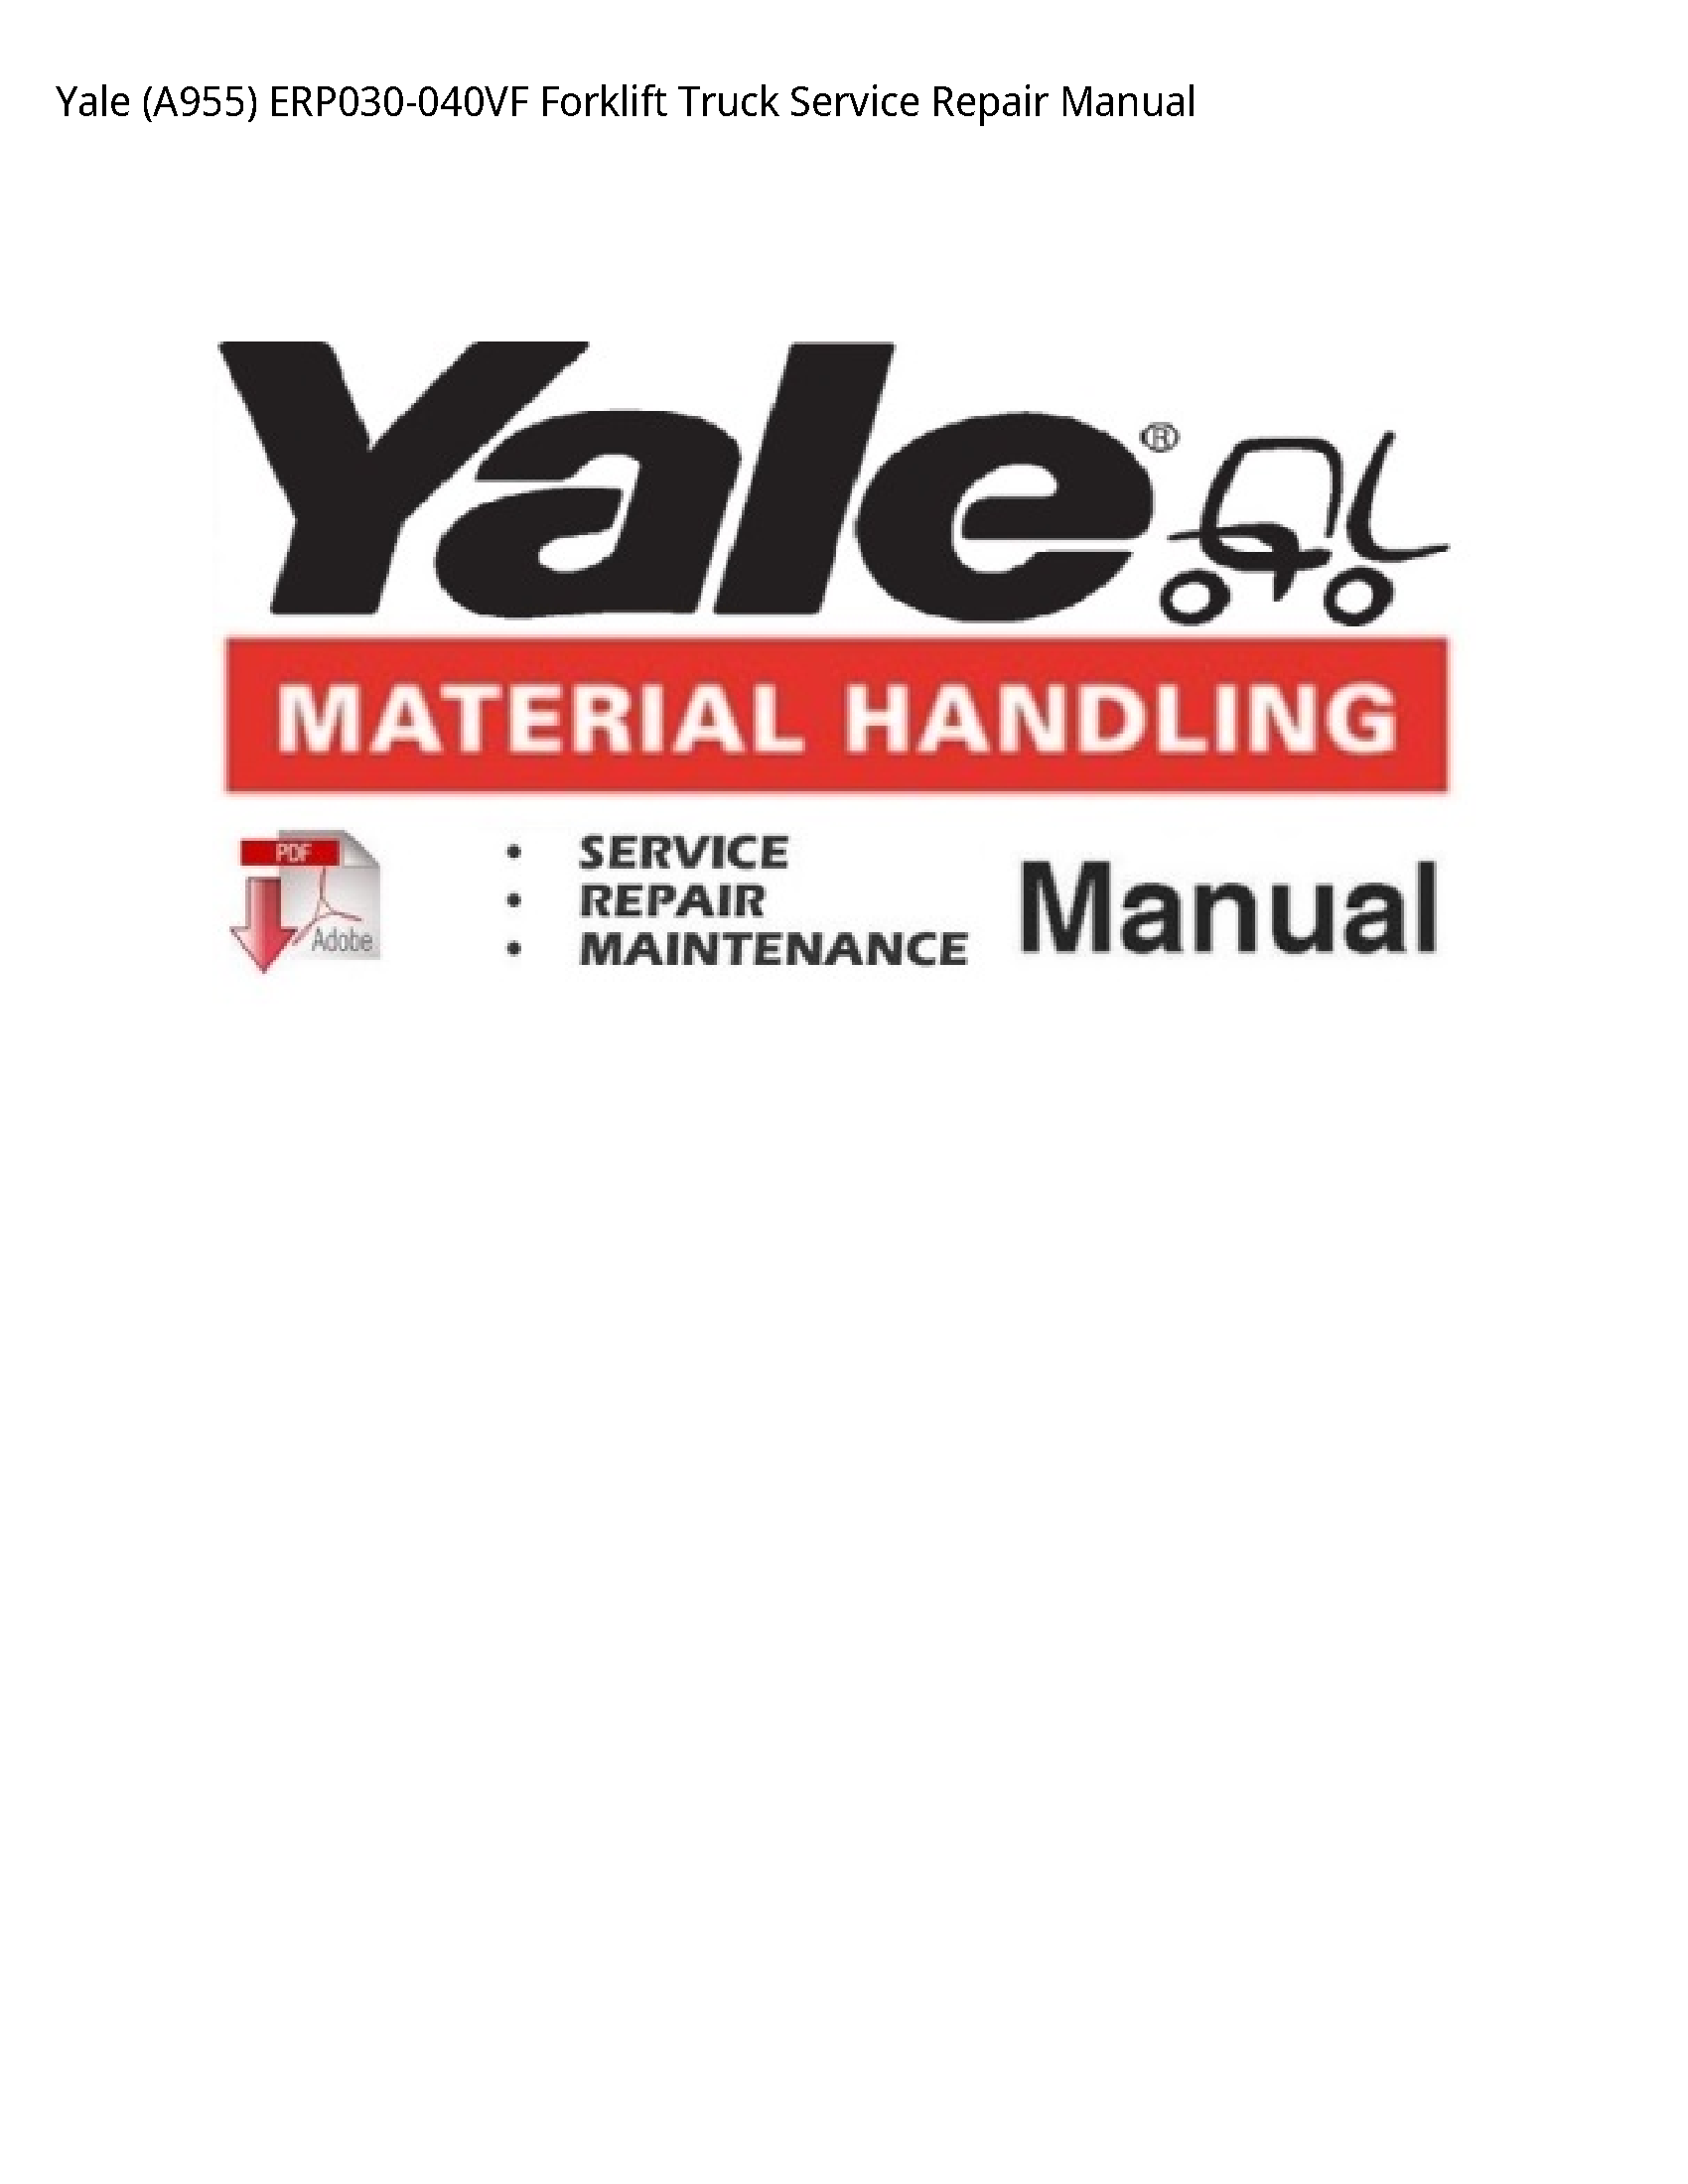 Yale (A955) Forklift Truck manual